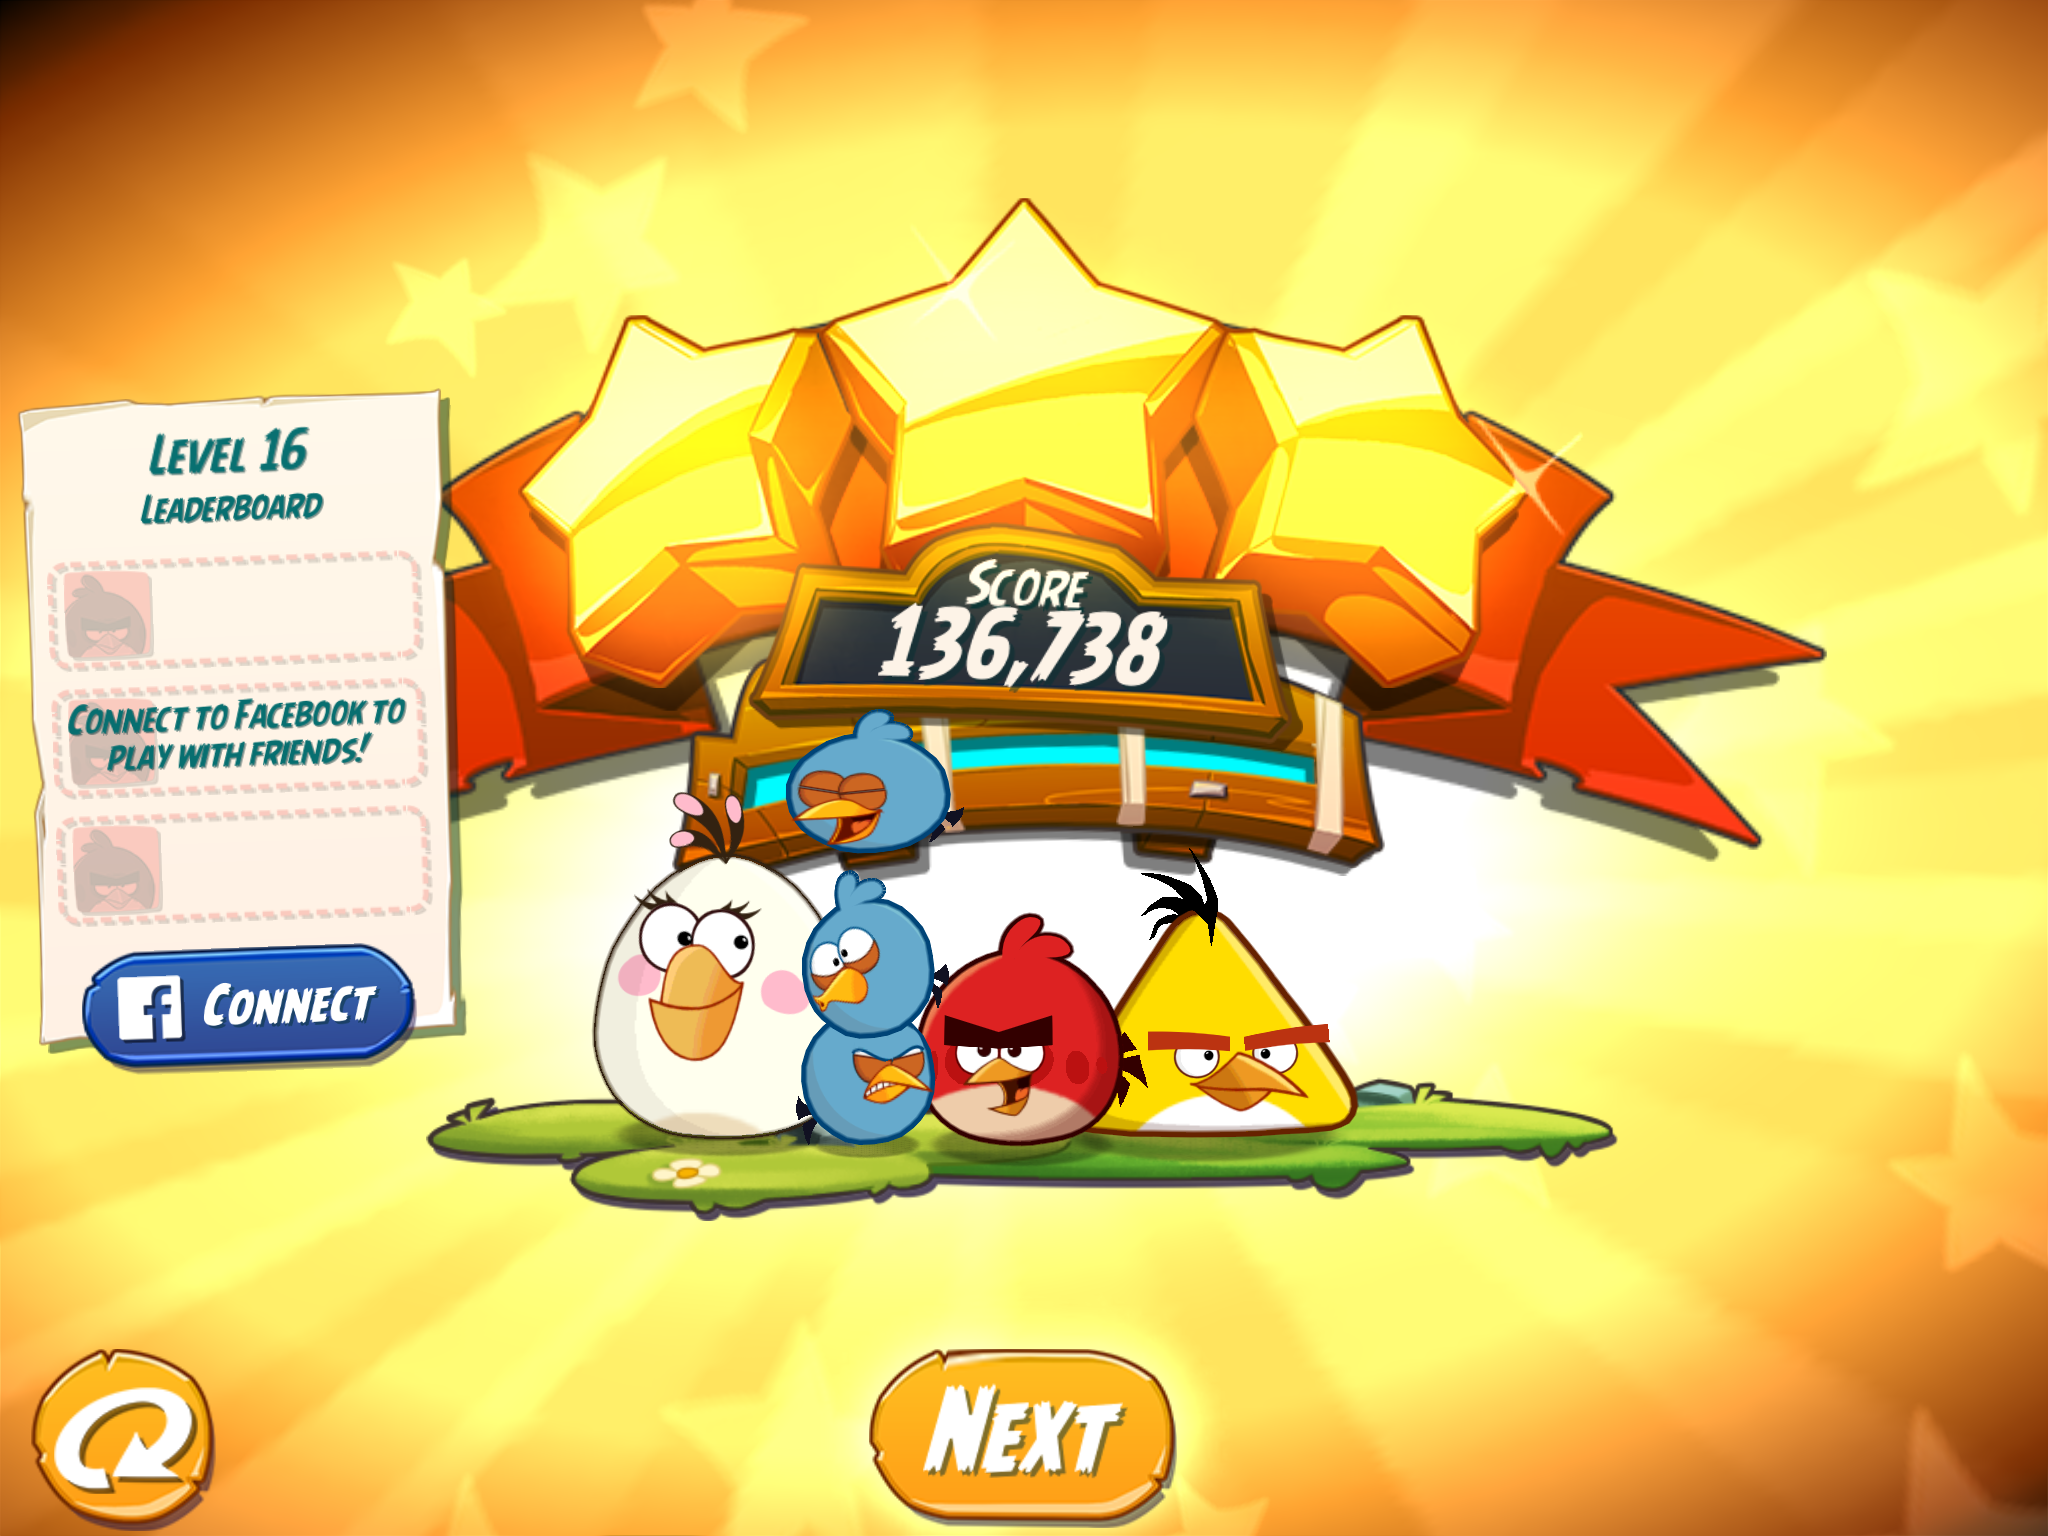 Angry Birds 2: Level 16 136,738 points